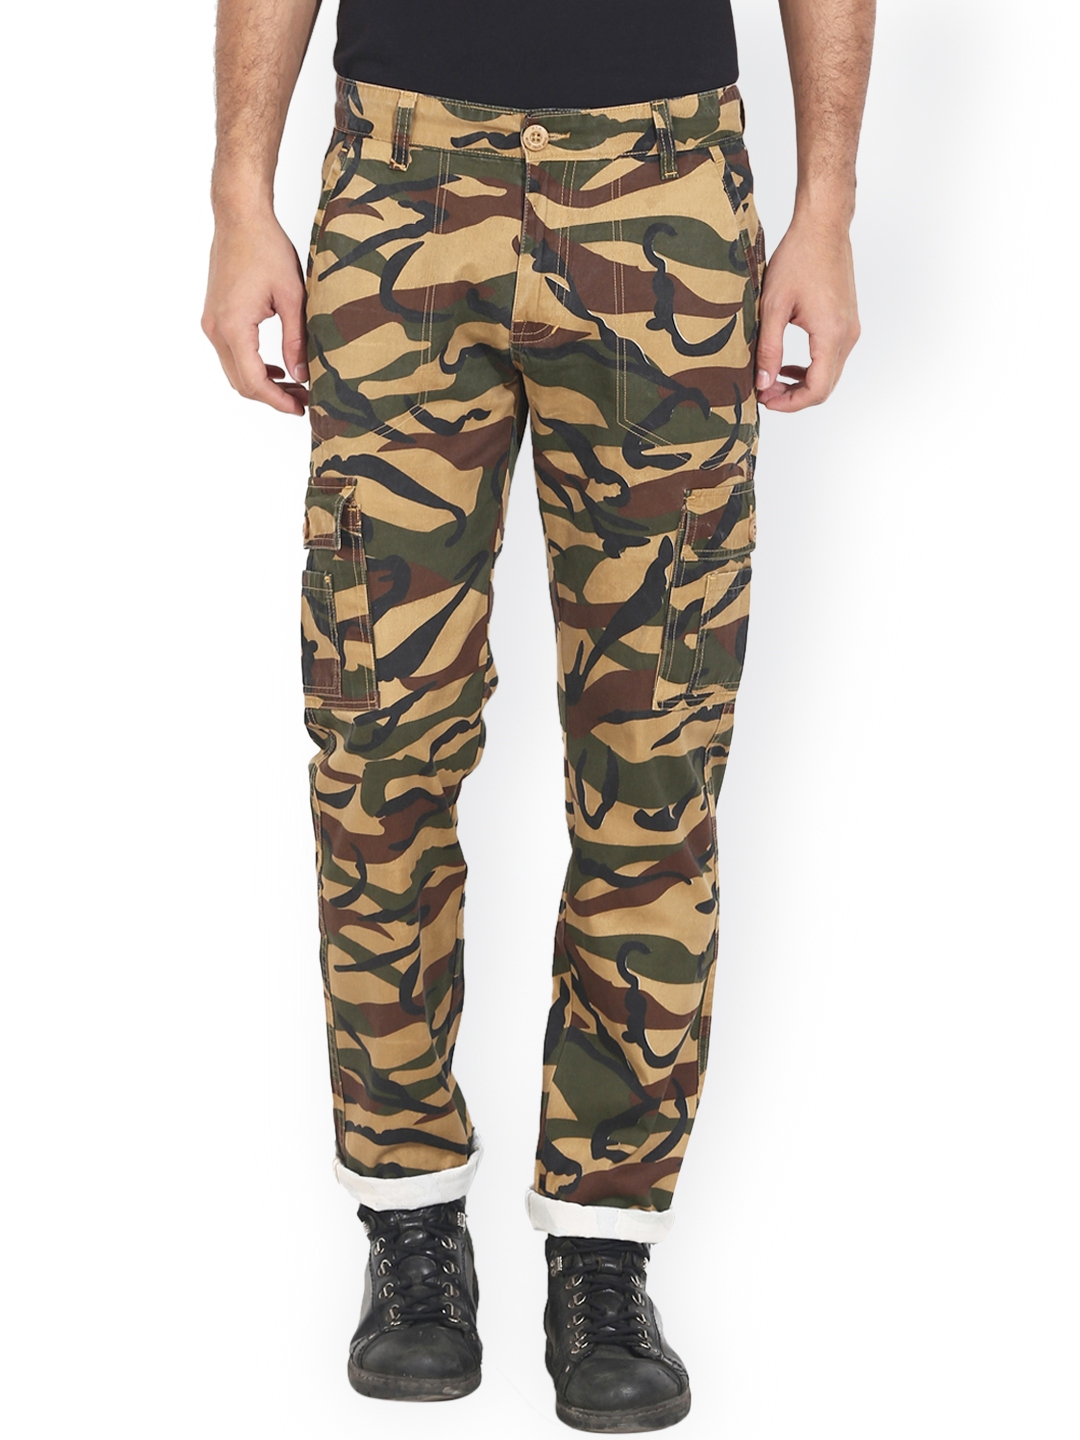 Grey Camo Print Cargo Trousers  PrettyLittleThing